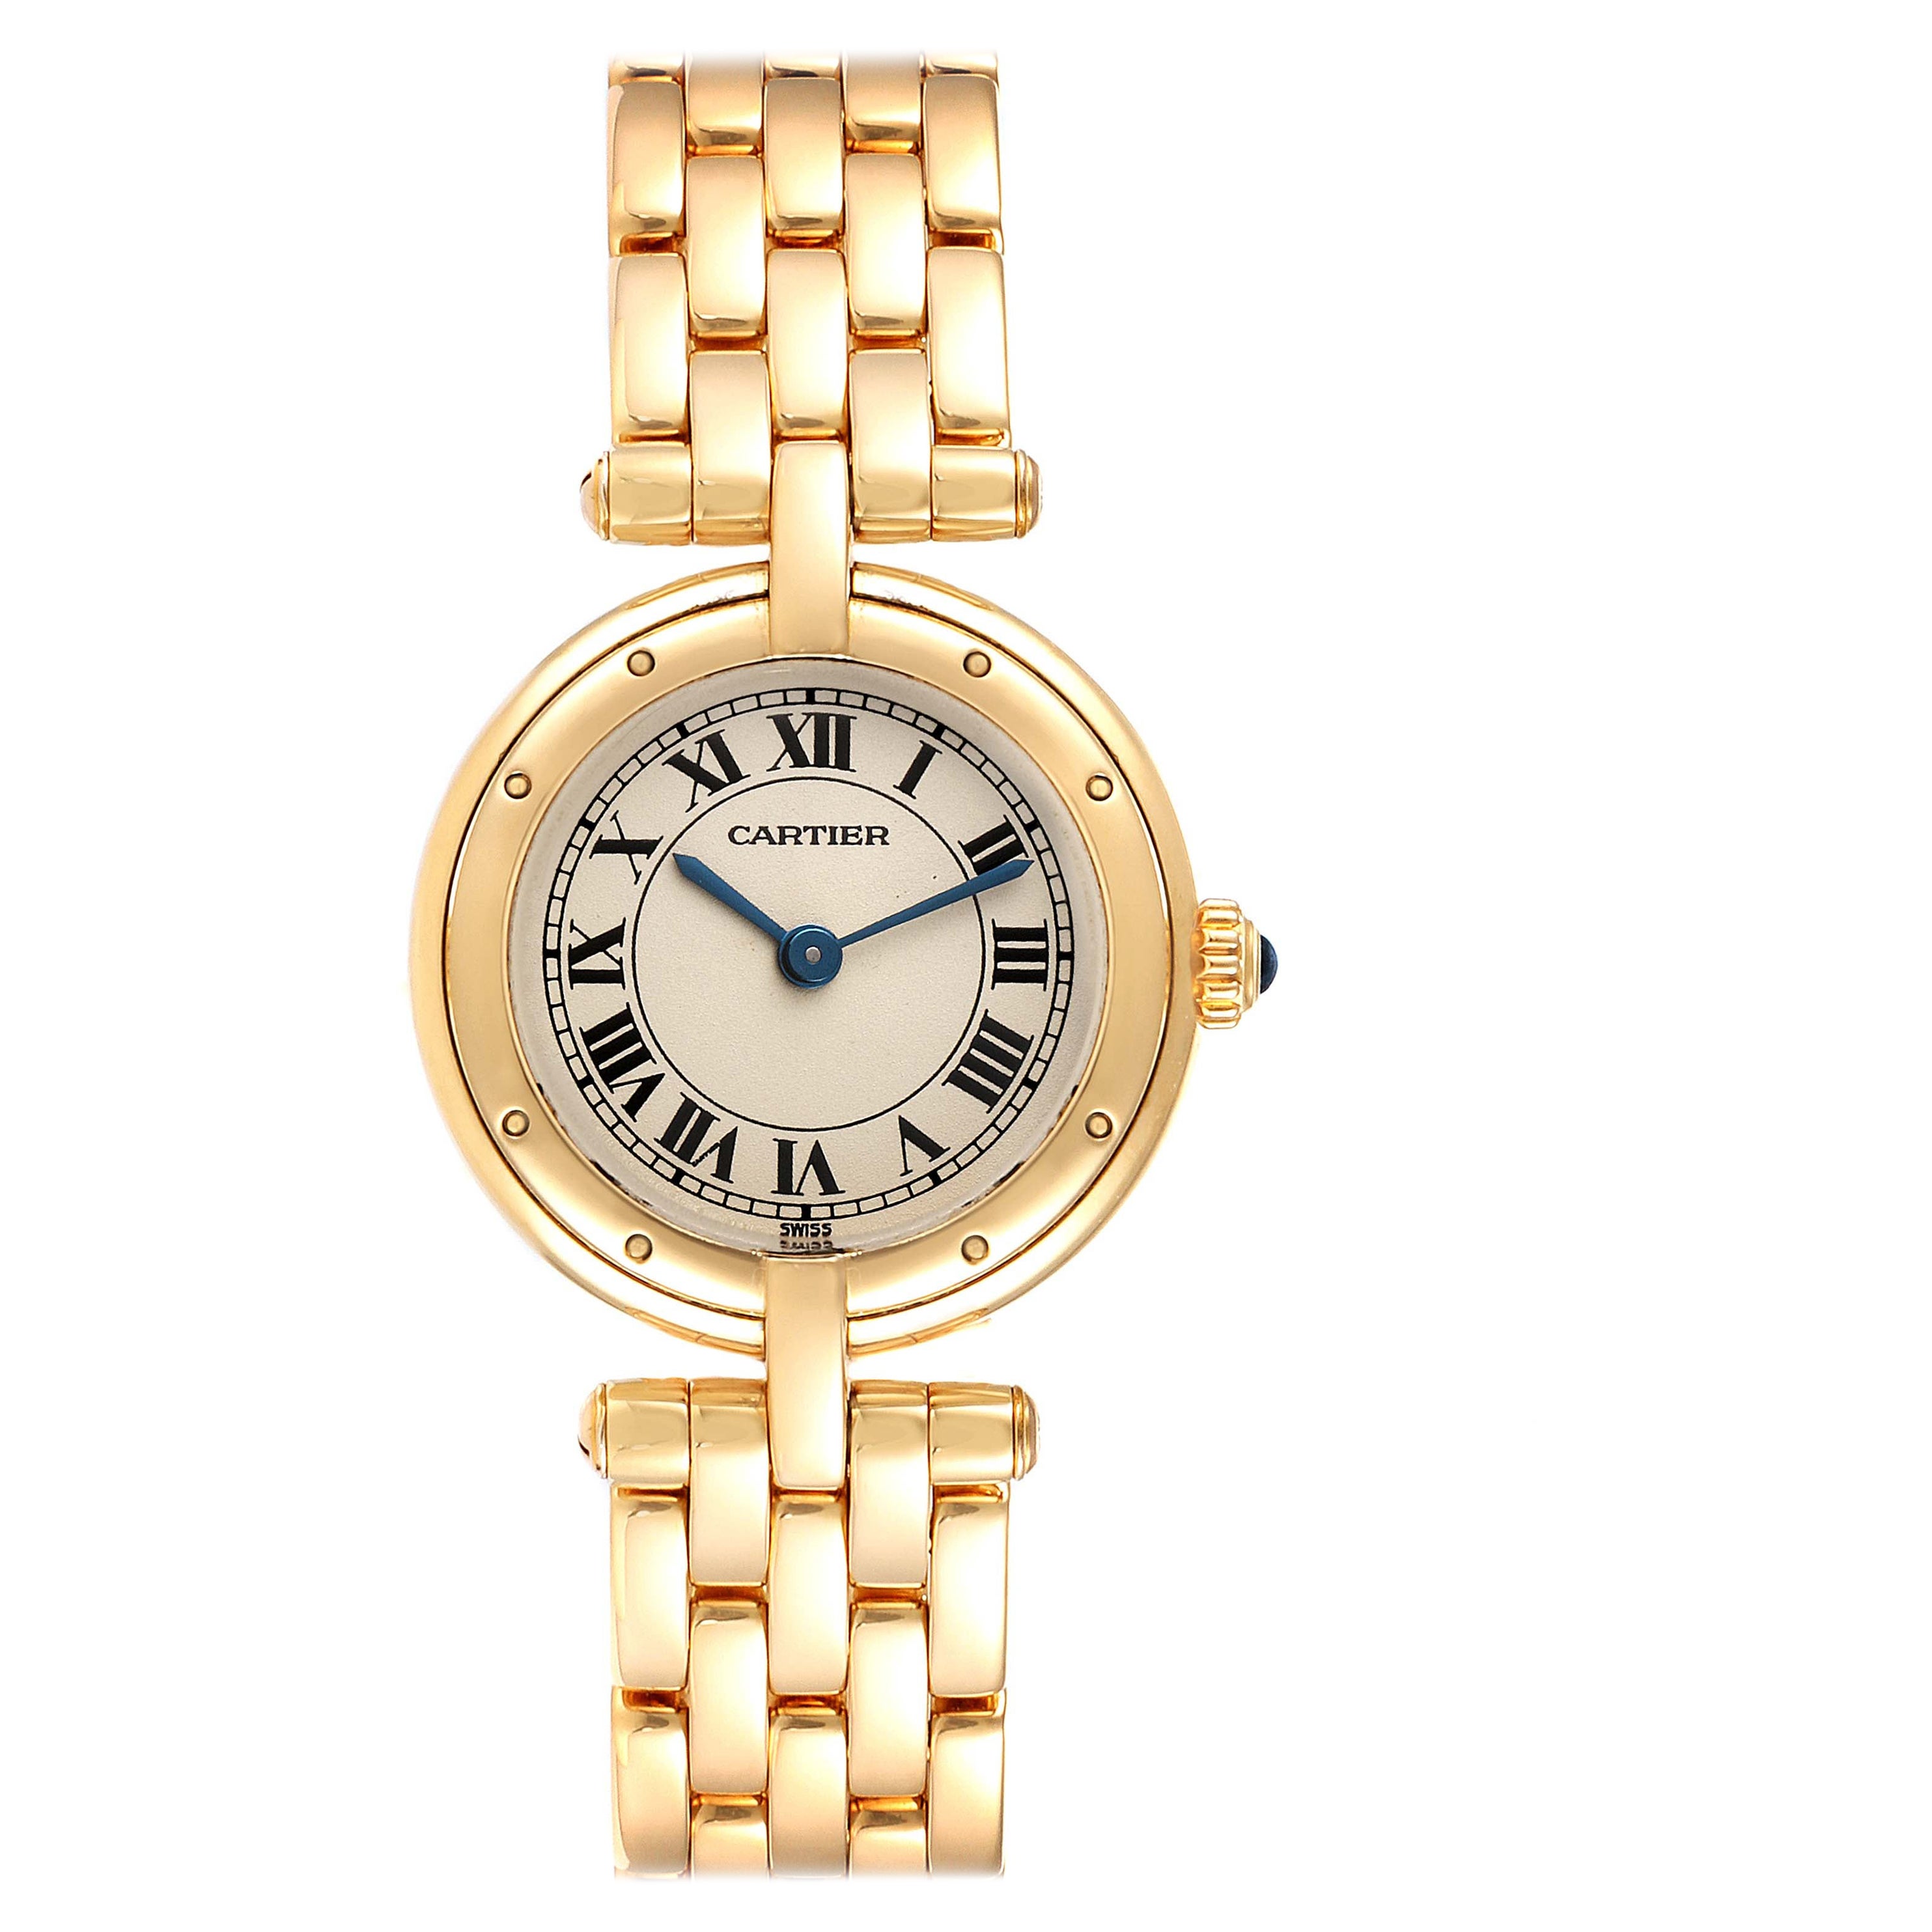 Cartier Panthere Vendome 18K Yellow Gold Ladies Watch 6692 For Sale